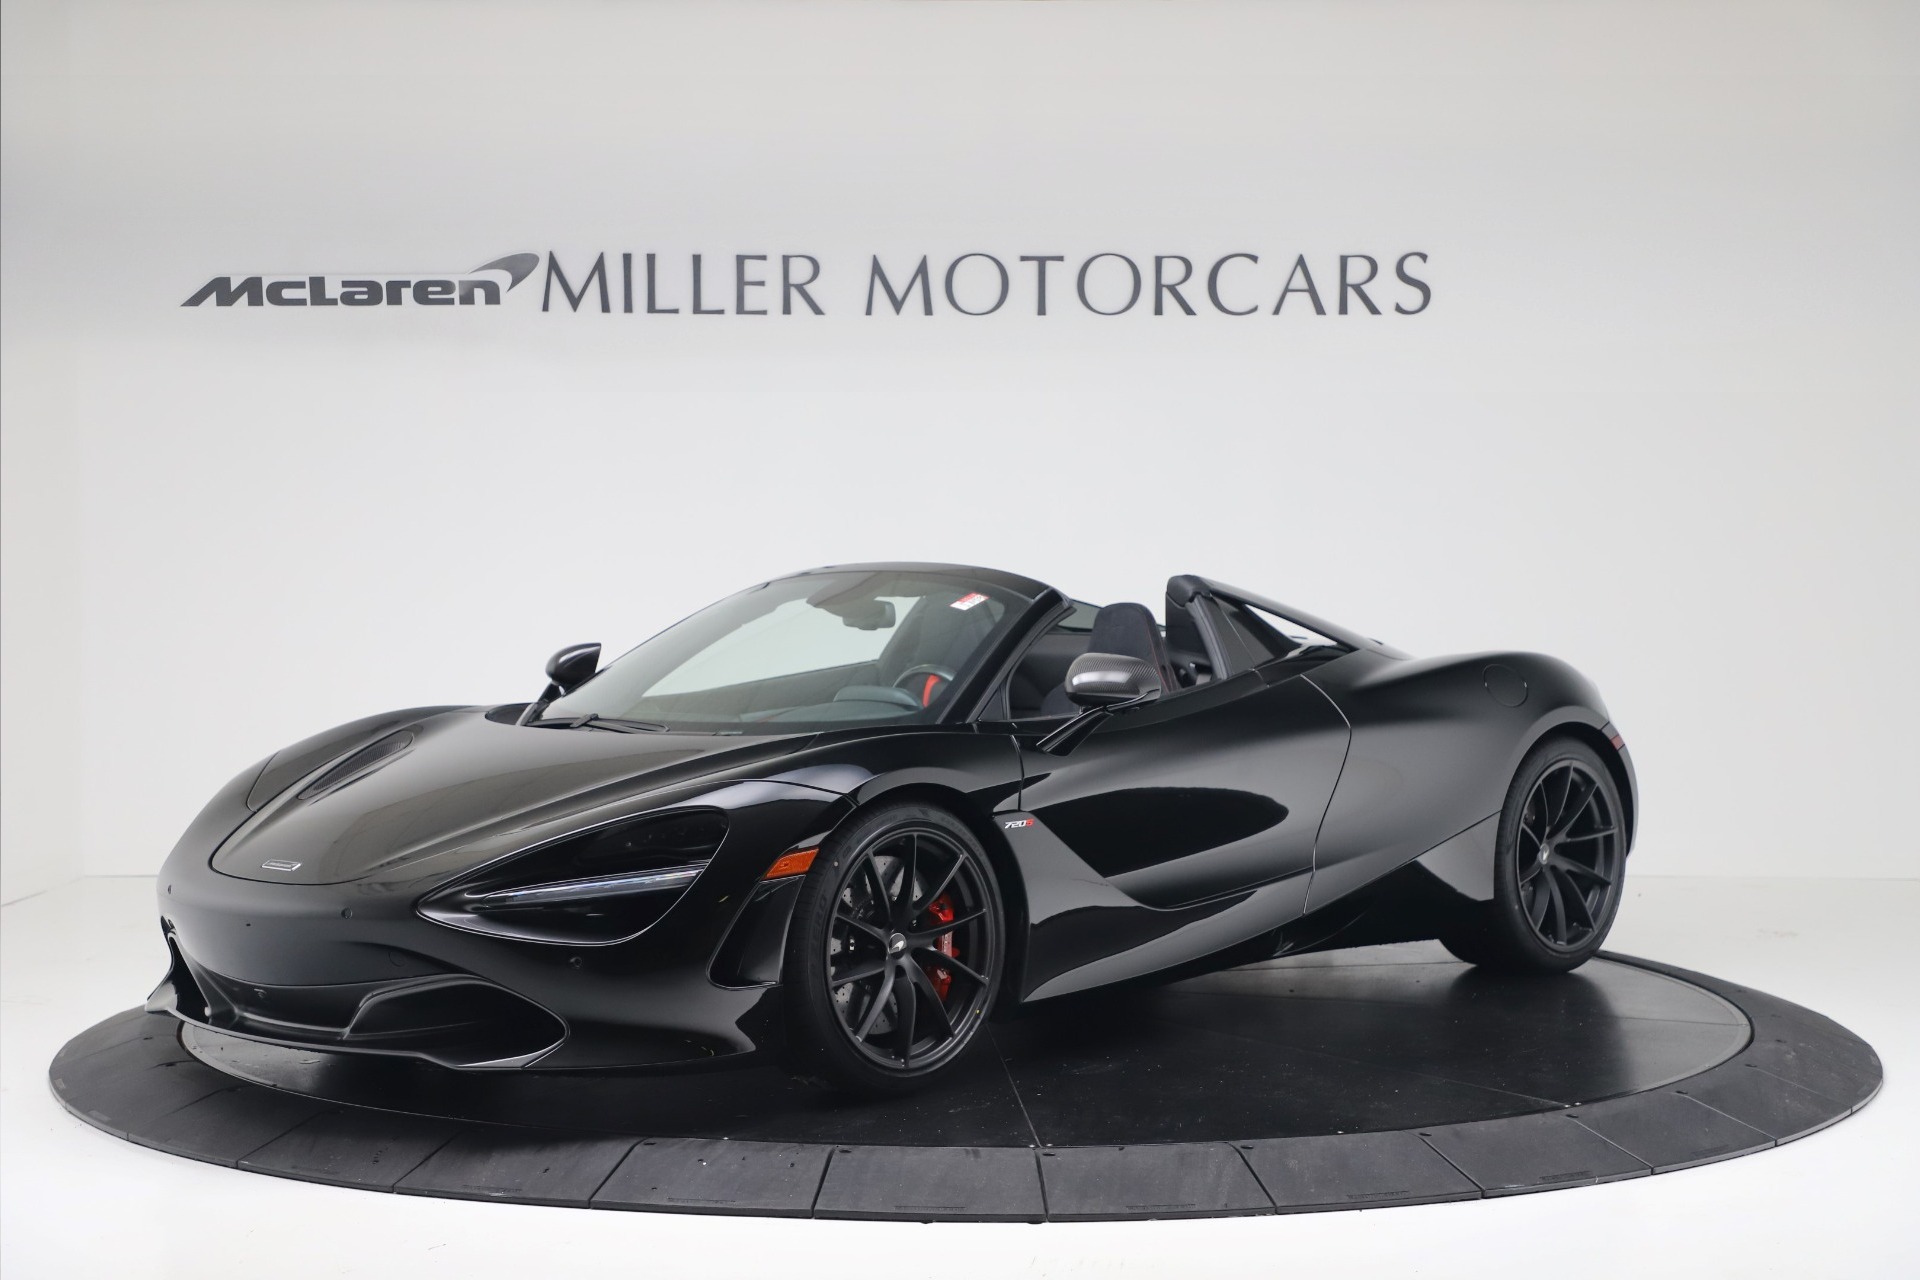 Used 2020 McLaren 720S Spider for sale Sold at Pagani of Greenwich in Greenwich CT 06830 1